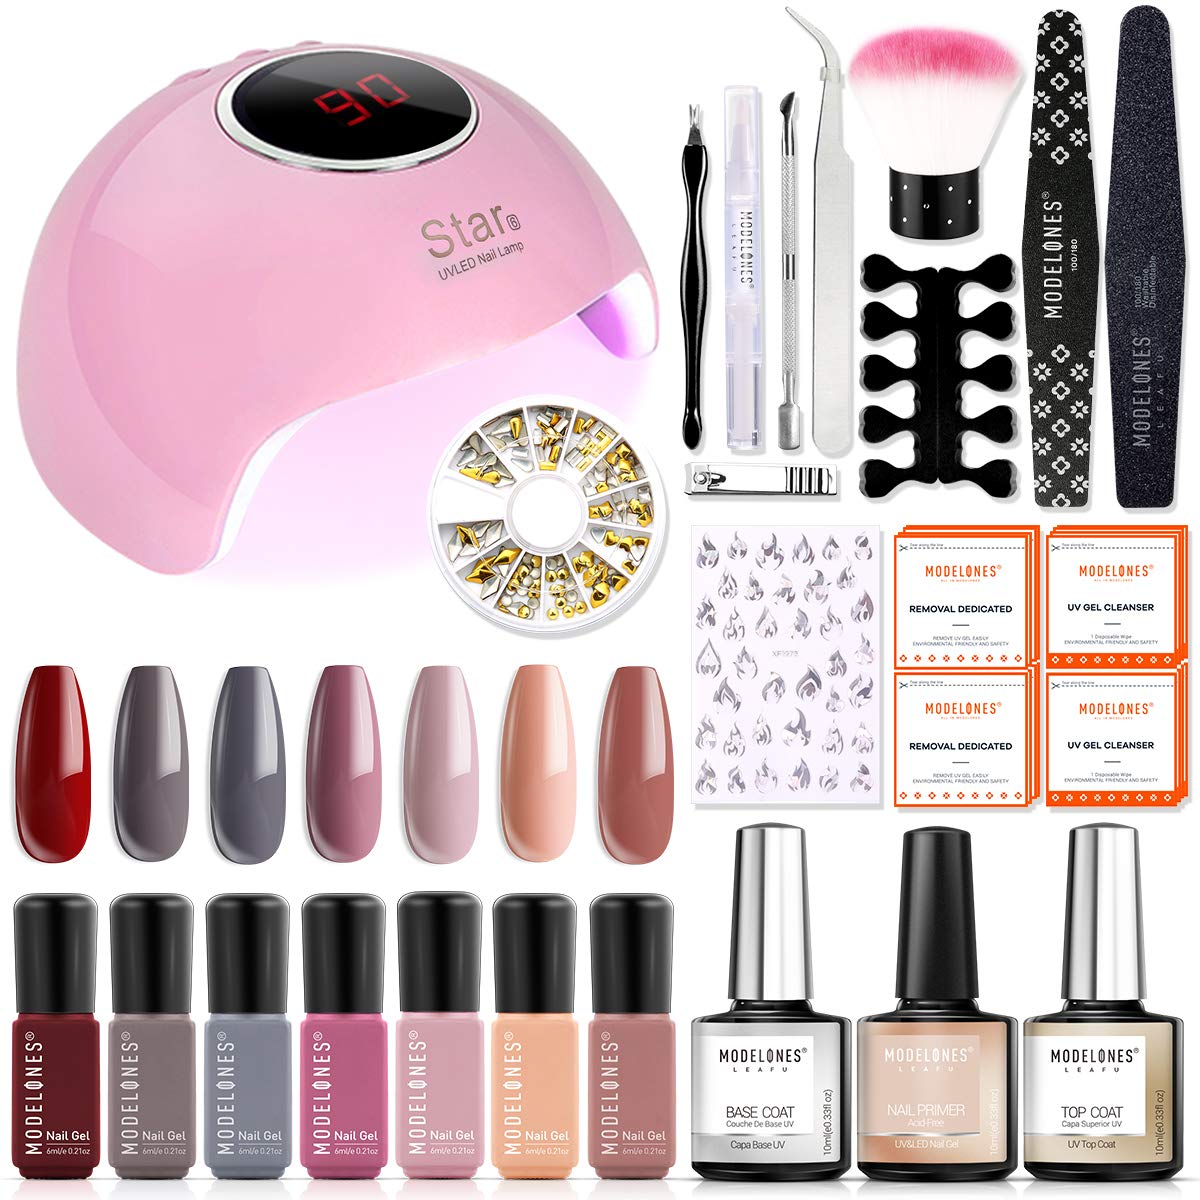 The Best Gel Nail Kits for AtHome Manicures